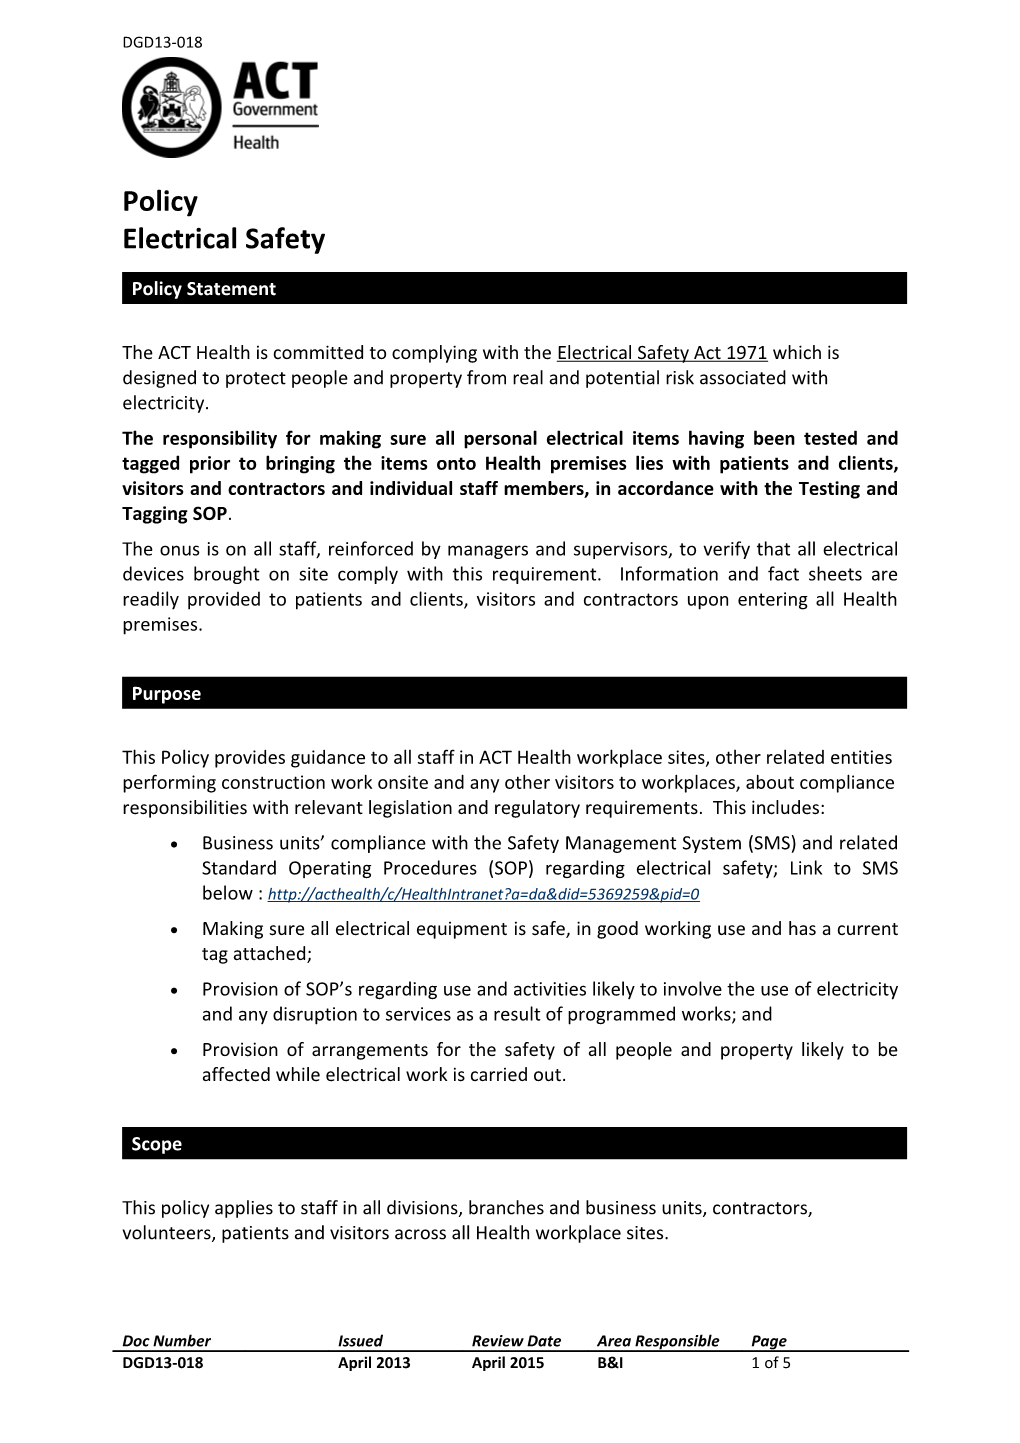 Electrical Safety Policy